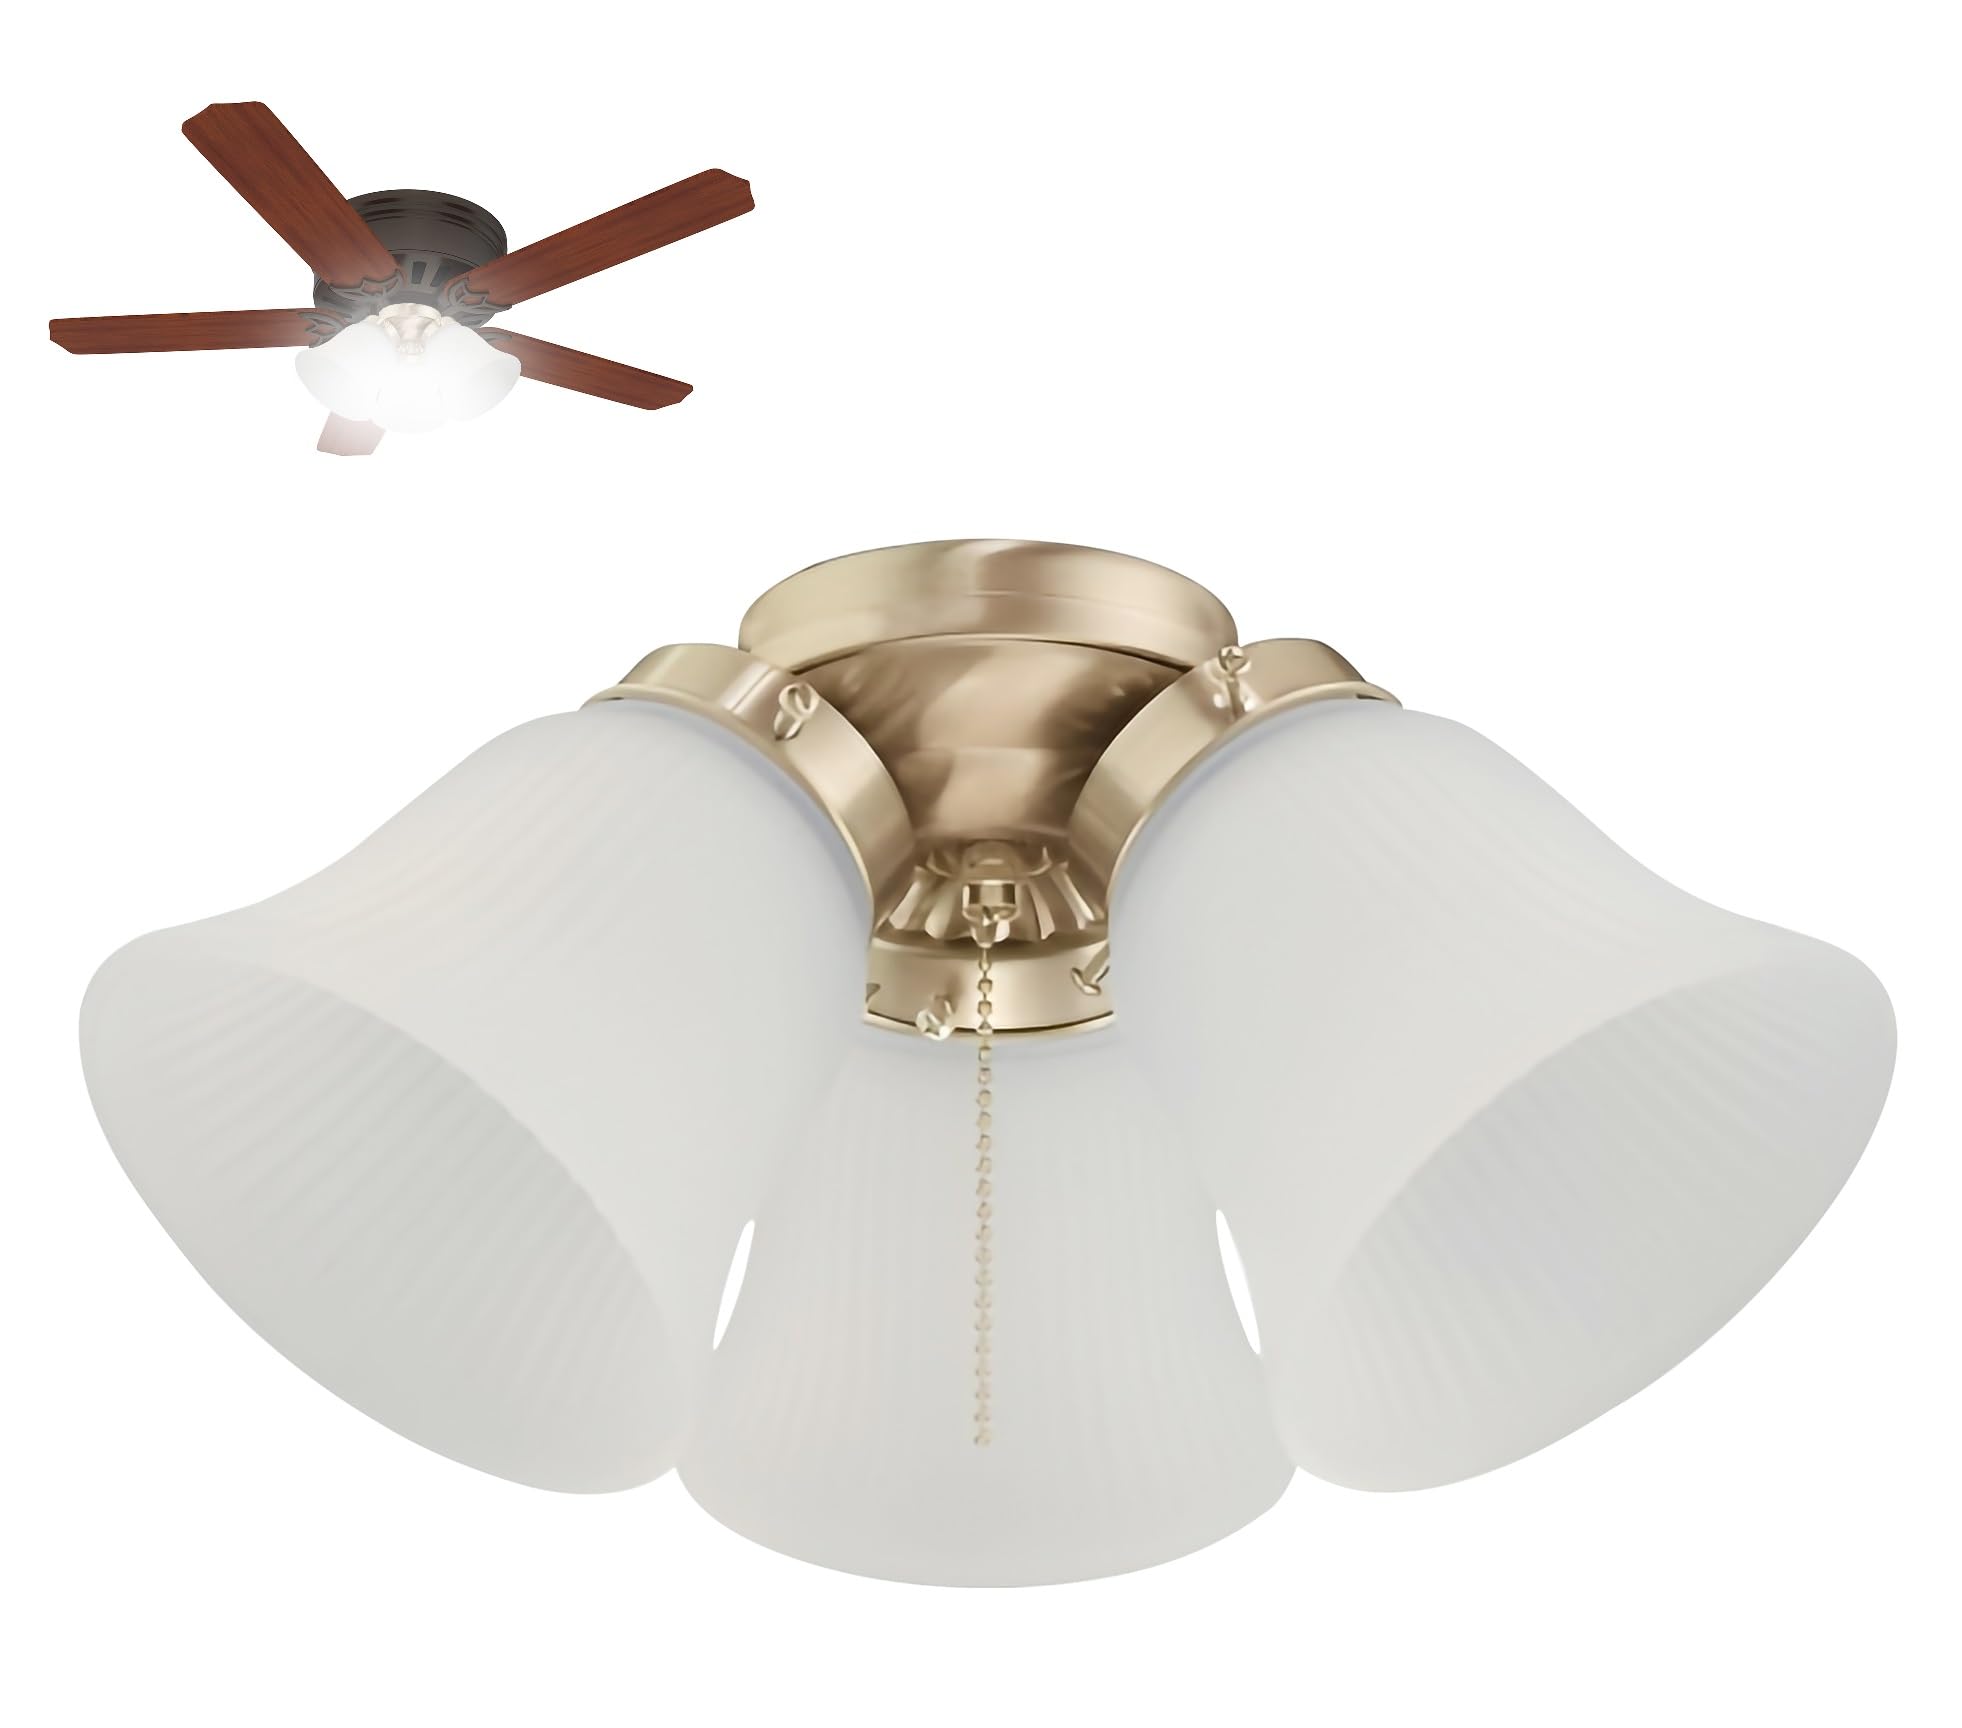 Ciata Modern Ceiling Fan Light Fixture Kit with 3 Frosted Ribbed Glass Bulb Shades and LED Lighting, Energy Efficient, Low Profile Cluster for Bedroom or Living Room - Polished Brass Polished Brass Cluster